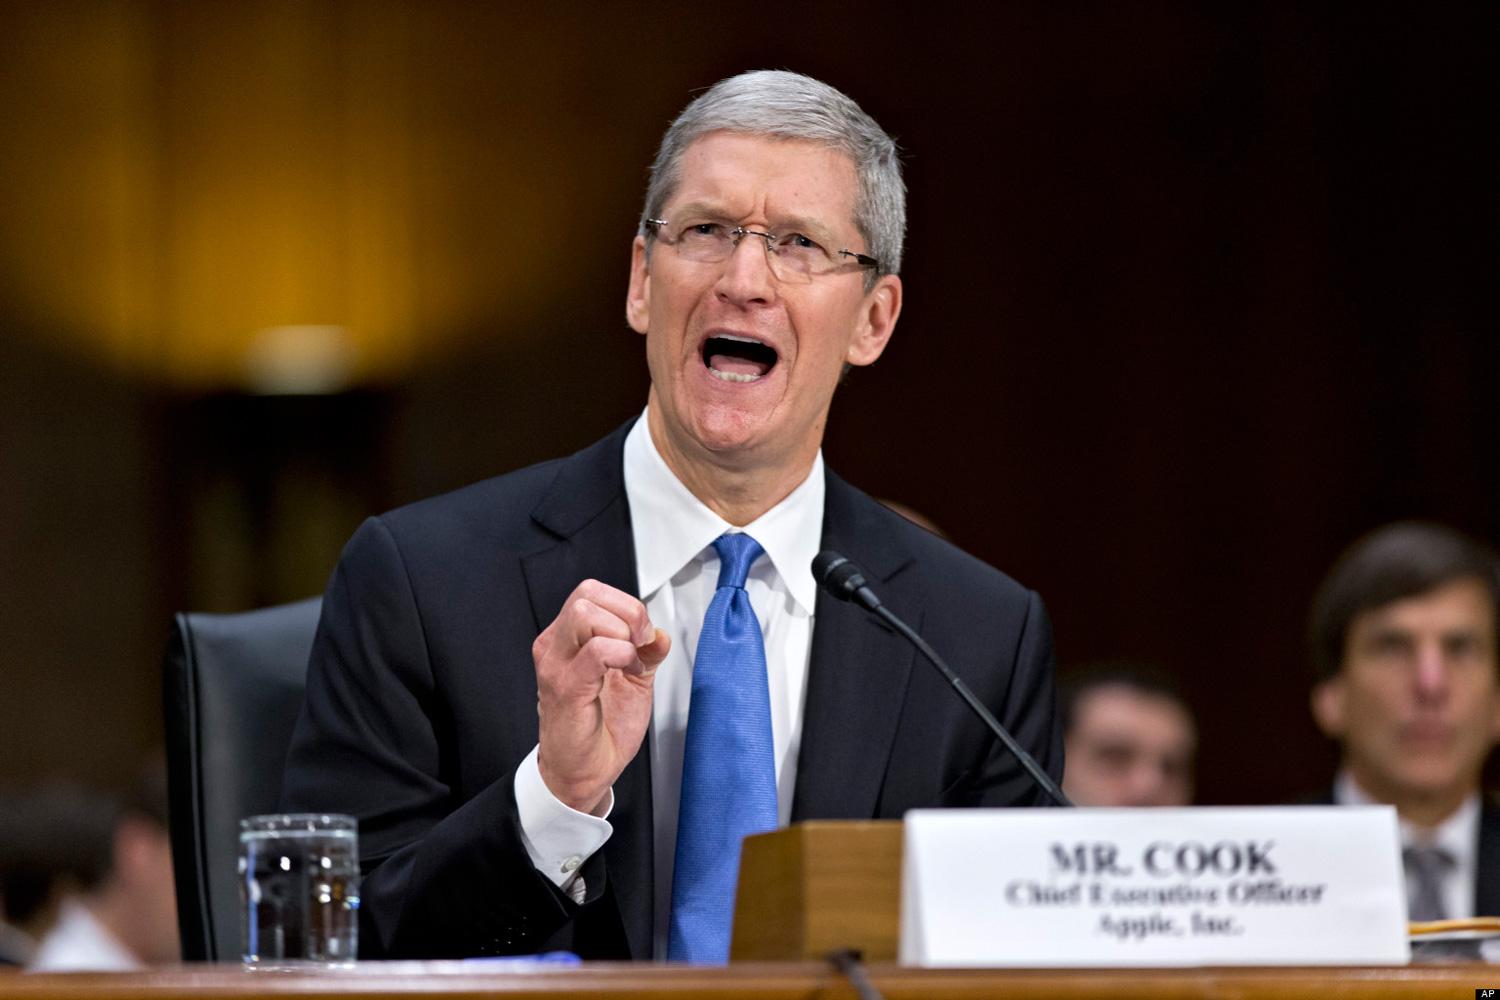 Tim Cook Throws Apple’s Support Behind Pro-LGBT, Anti-Discrimination Bill